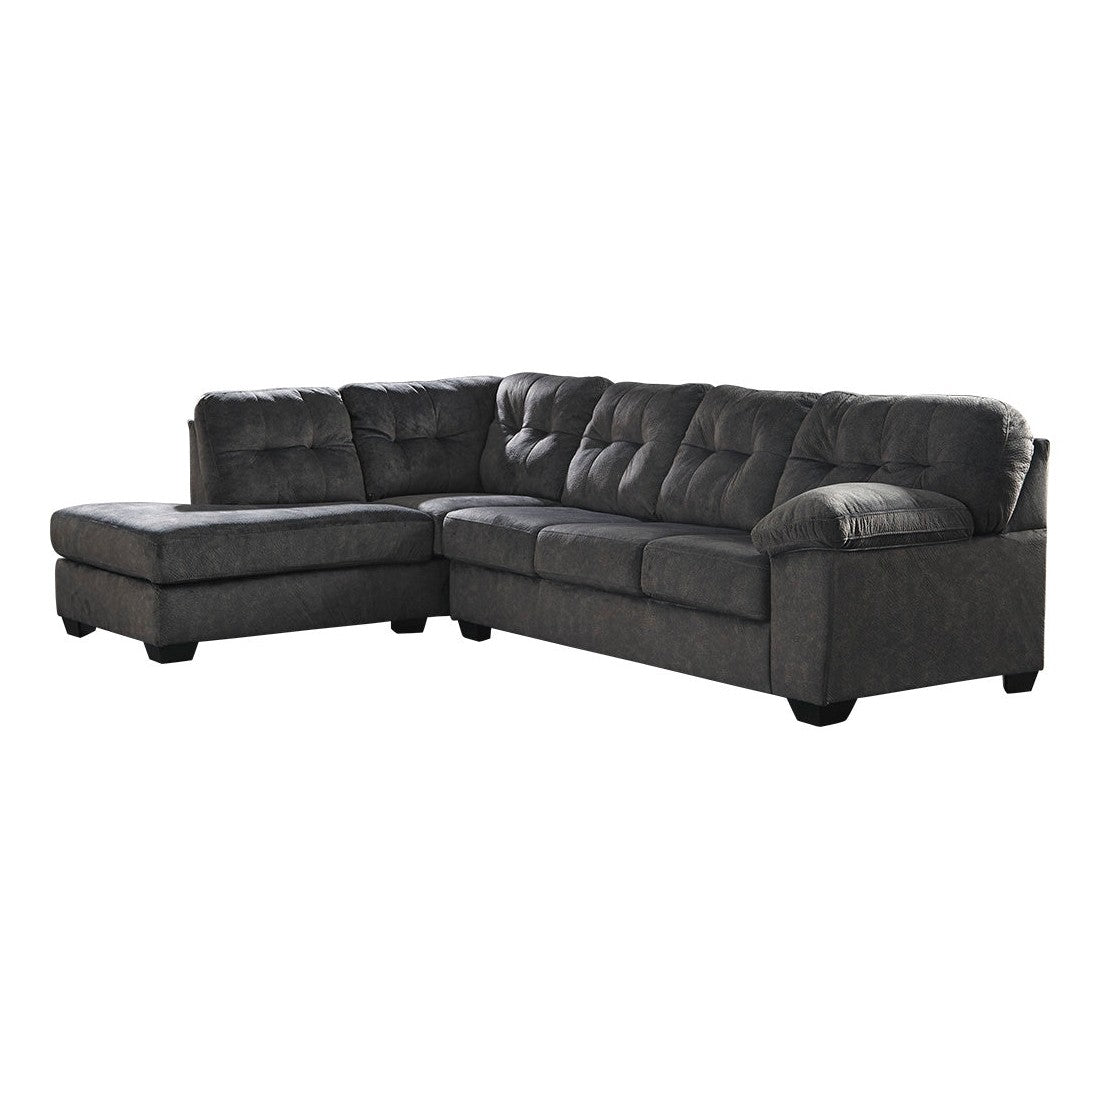 Accrington 2-Piece Sleeper Sectional with Chaise - Ash-70509S2 - Underkut